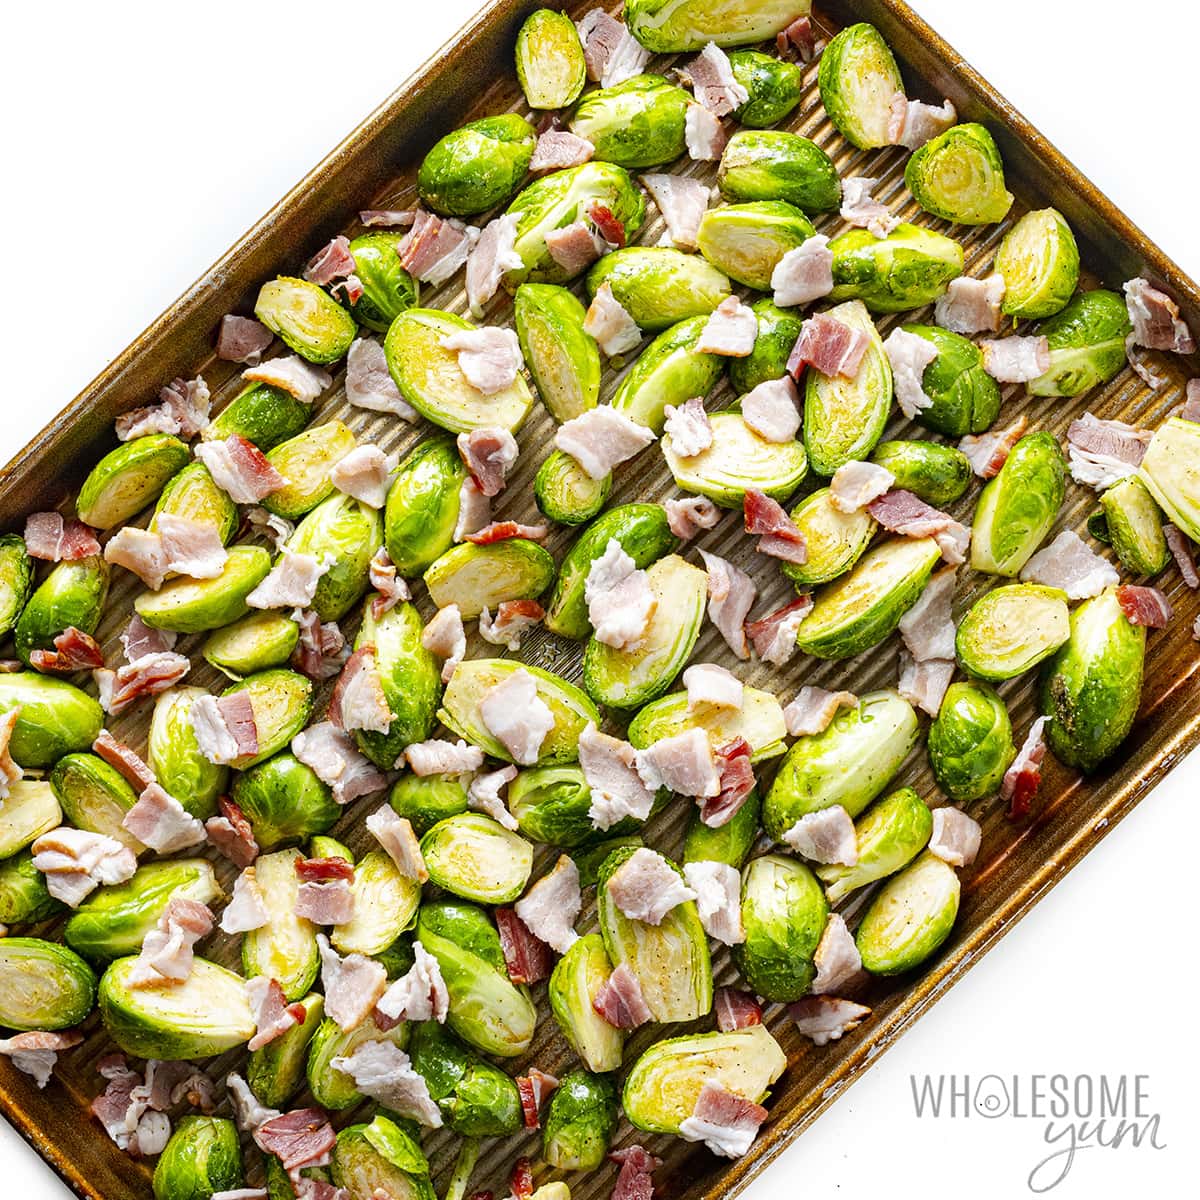 Place raw Brussels sprouts and bacon on a baking sheet.